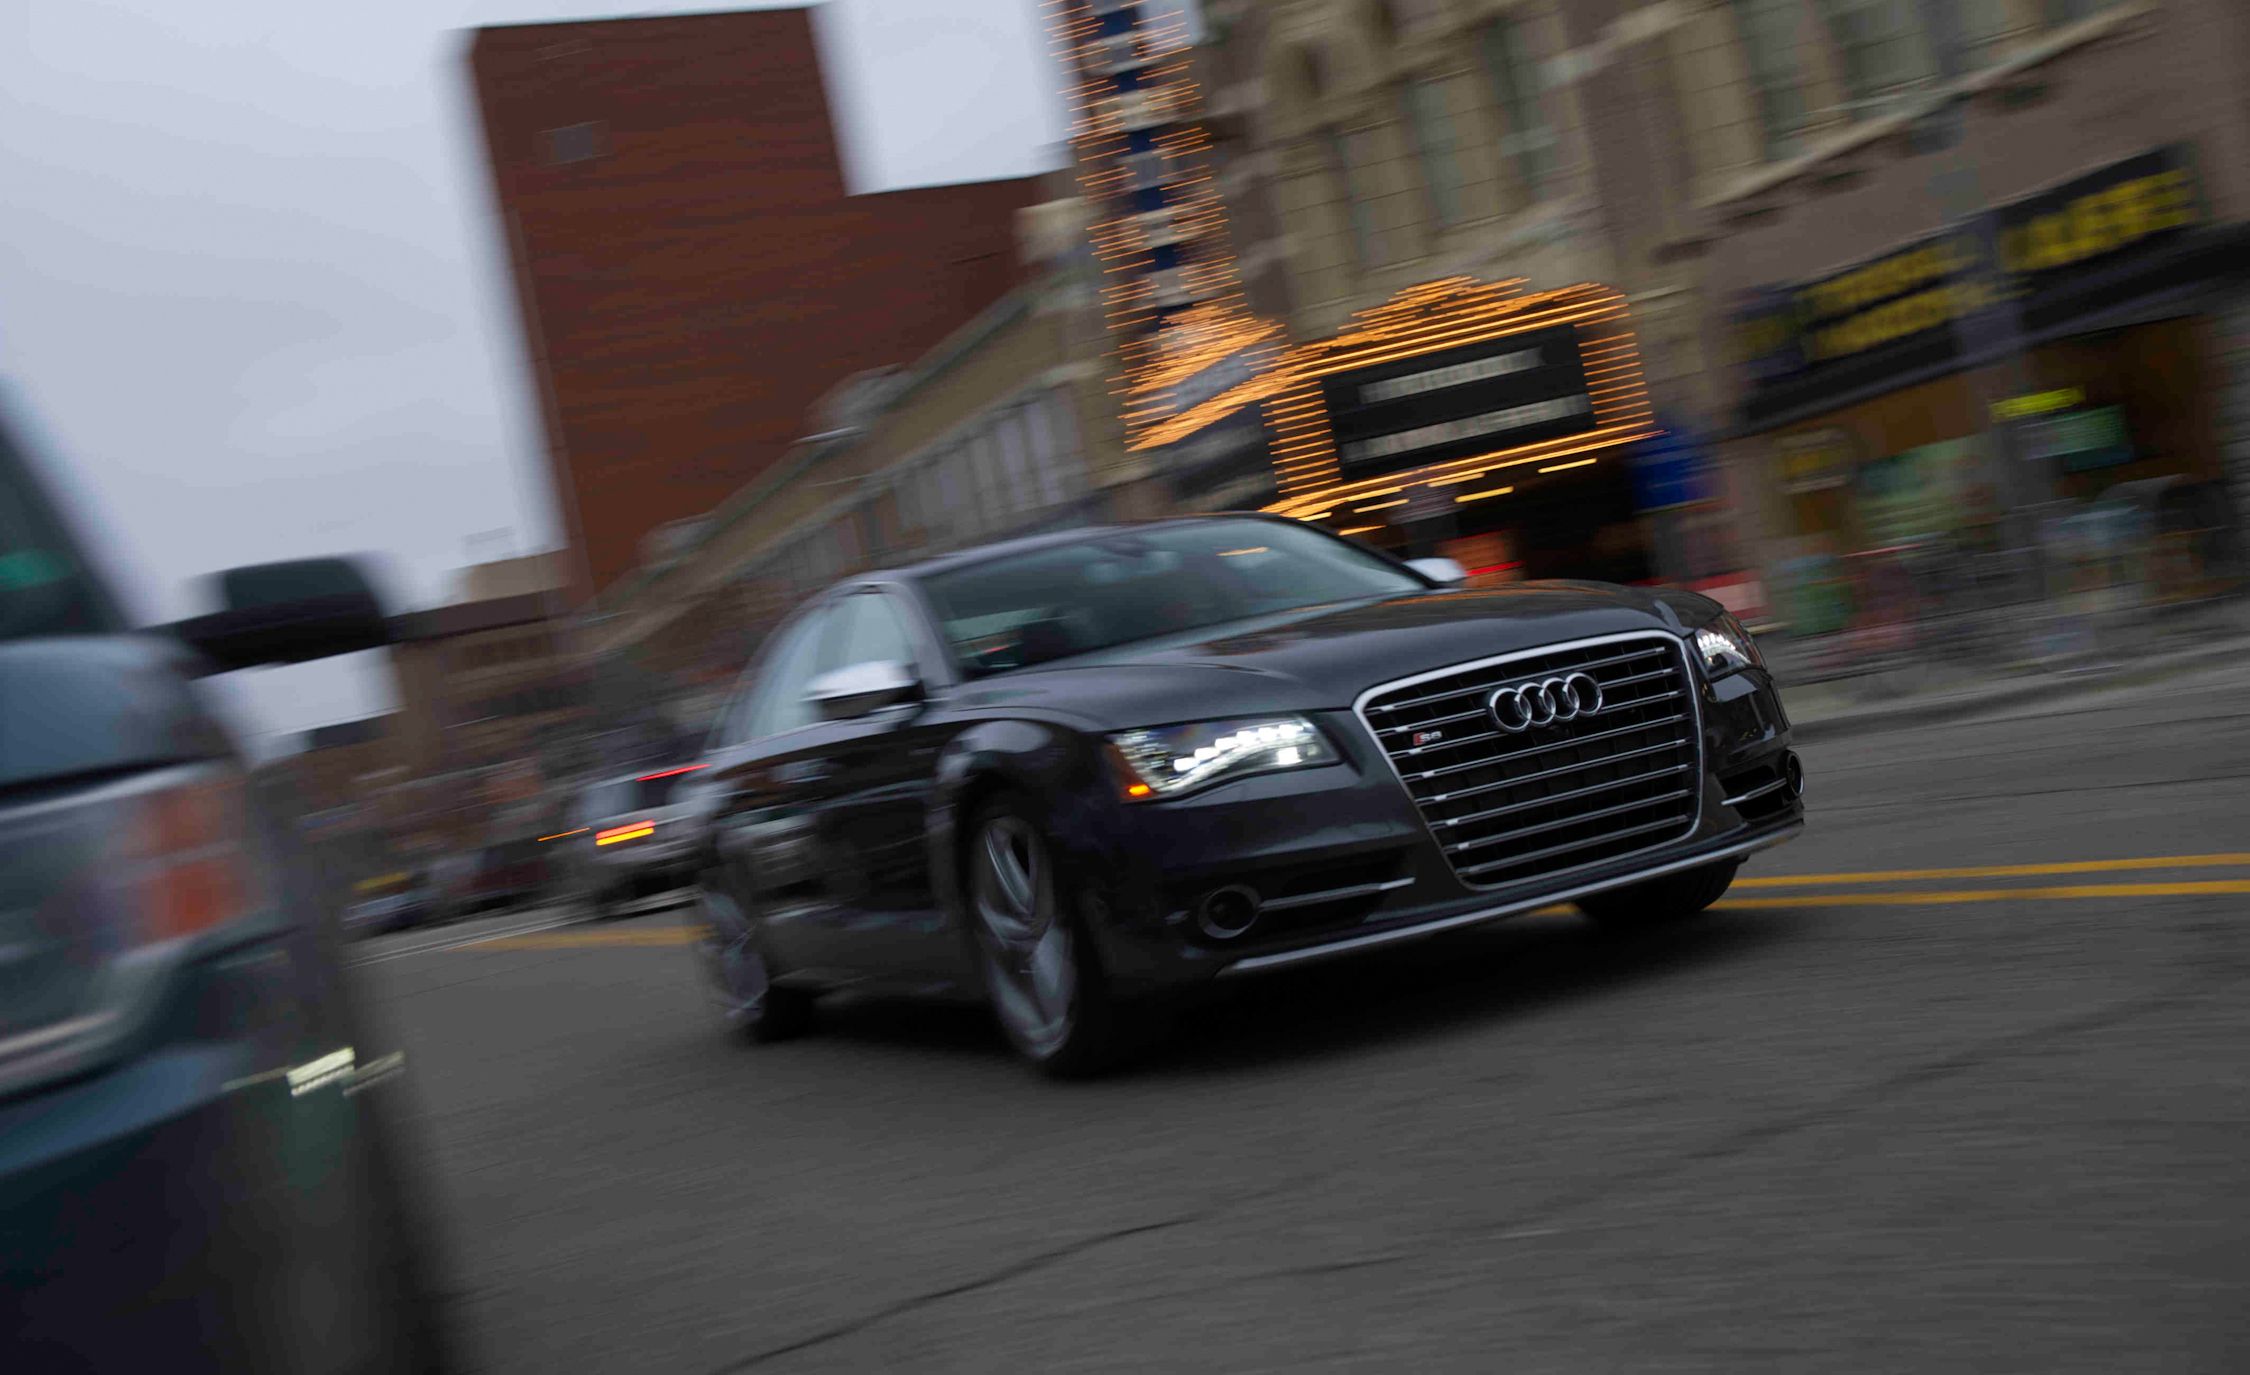 2013 Audi S8 Test Drive Front View (View 10 of 25)